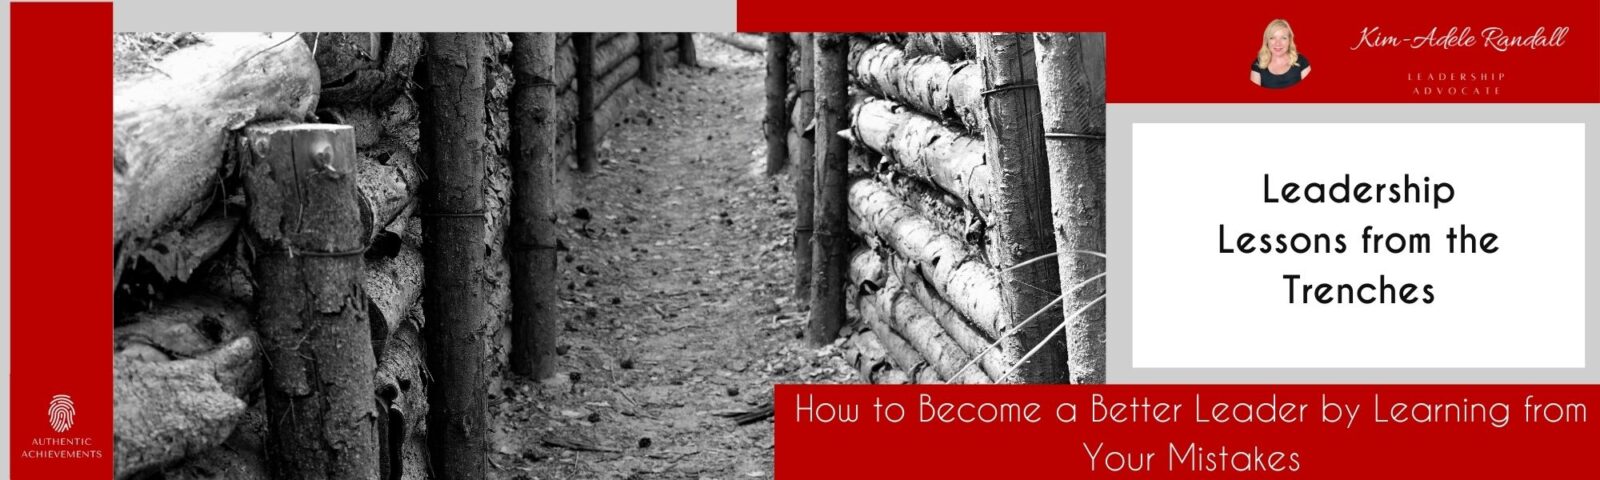 Leadership Lessons from the Trenches: How to Become a Better Leader by Learning from Your Mistakes